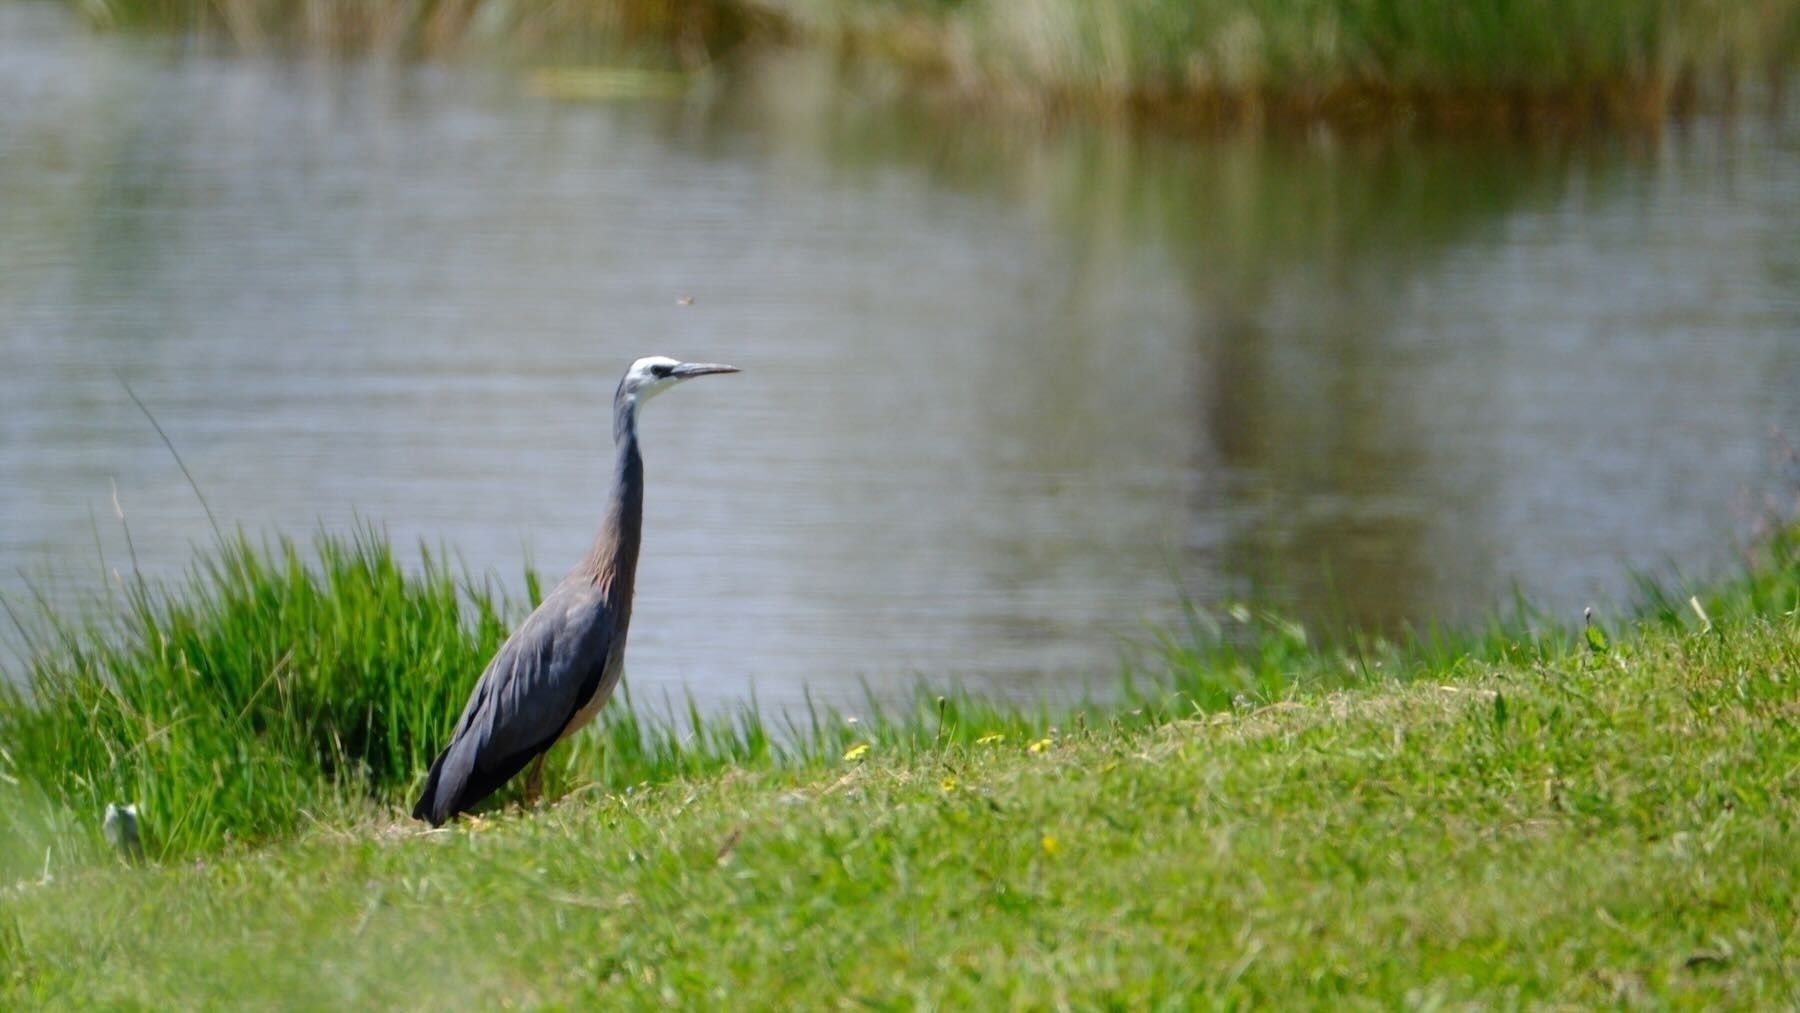 Large grey bird with long neck and white face, standing on grass beside a lake. 